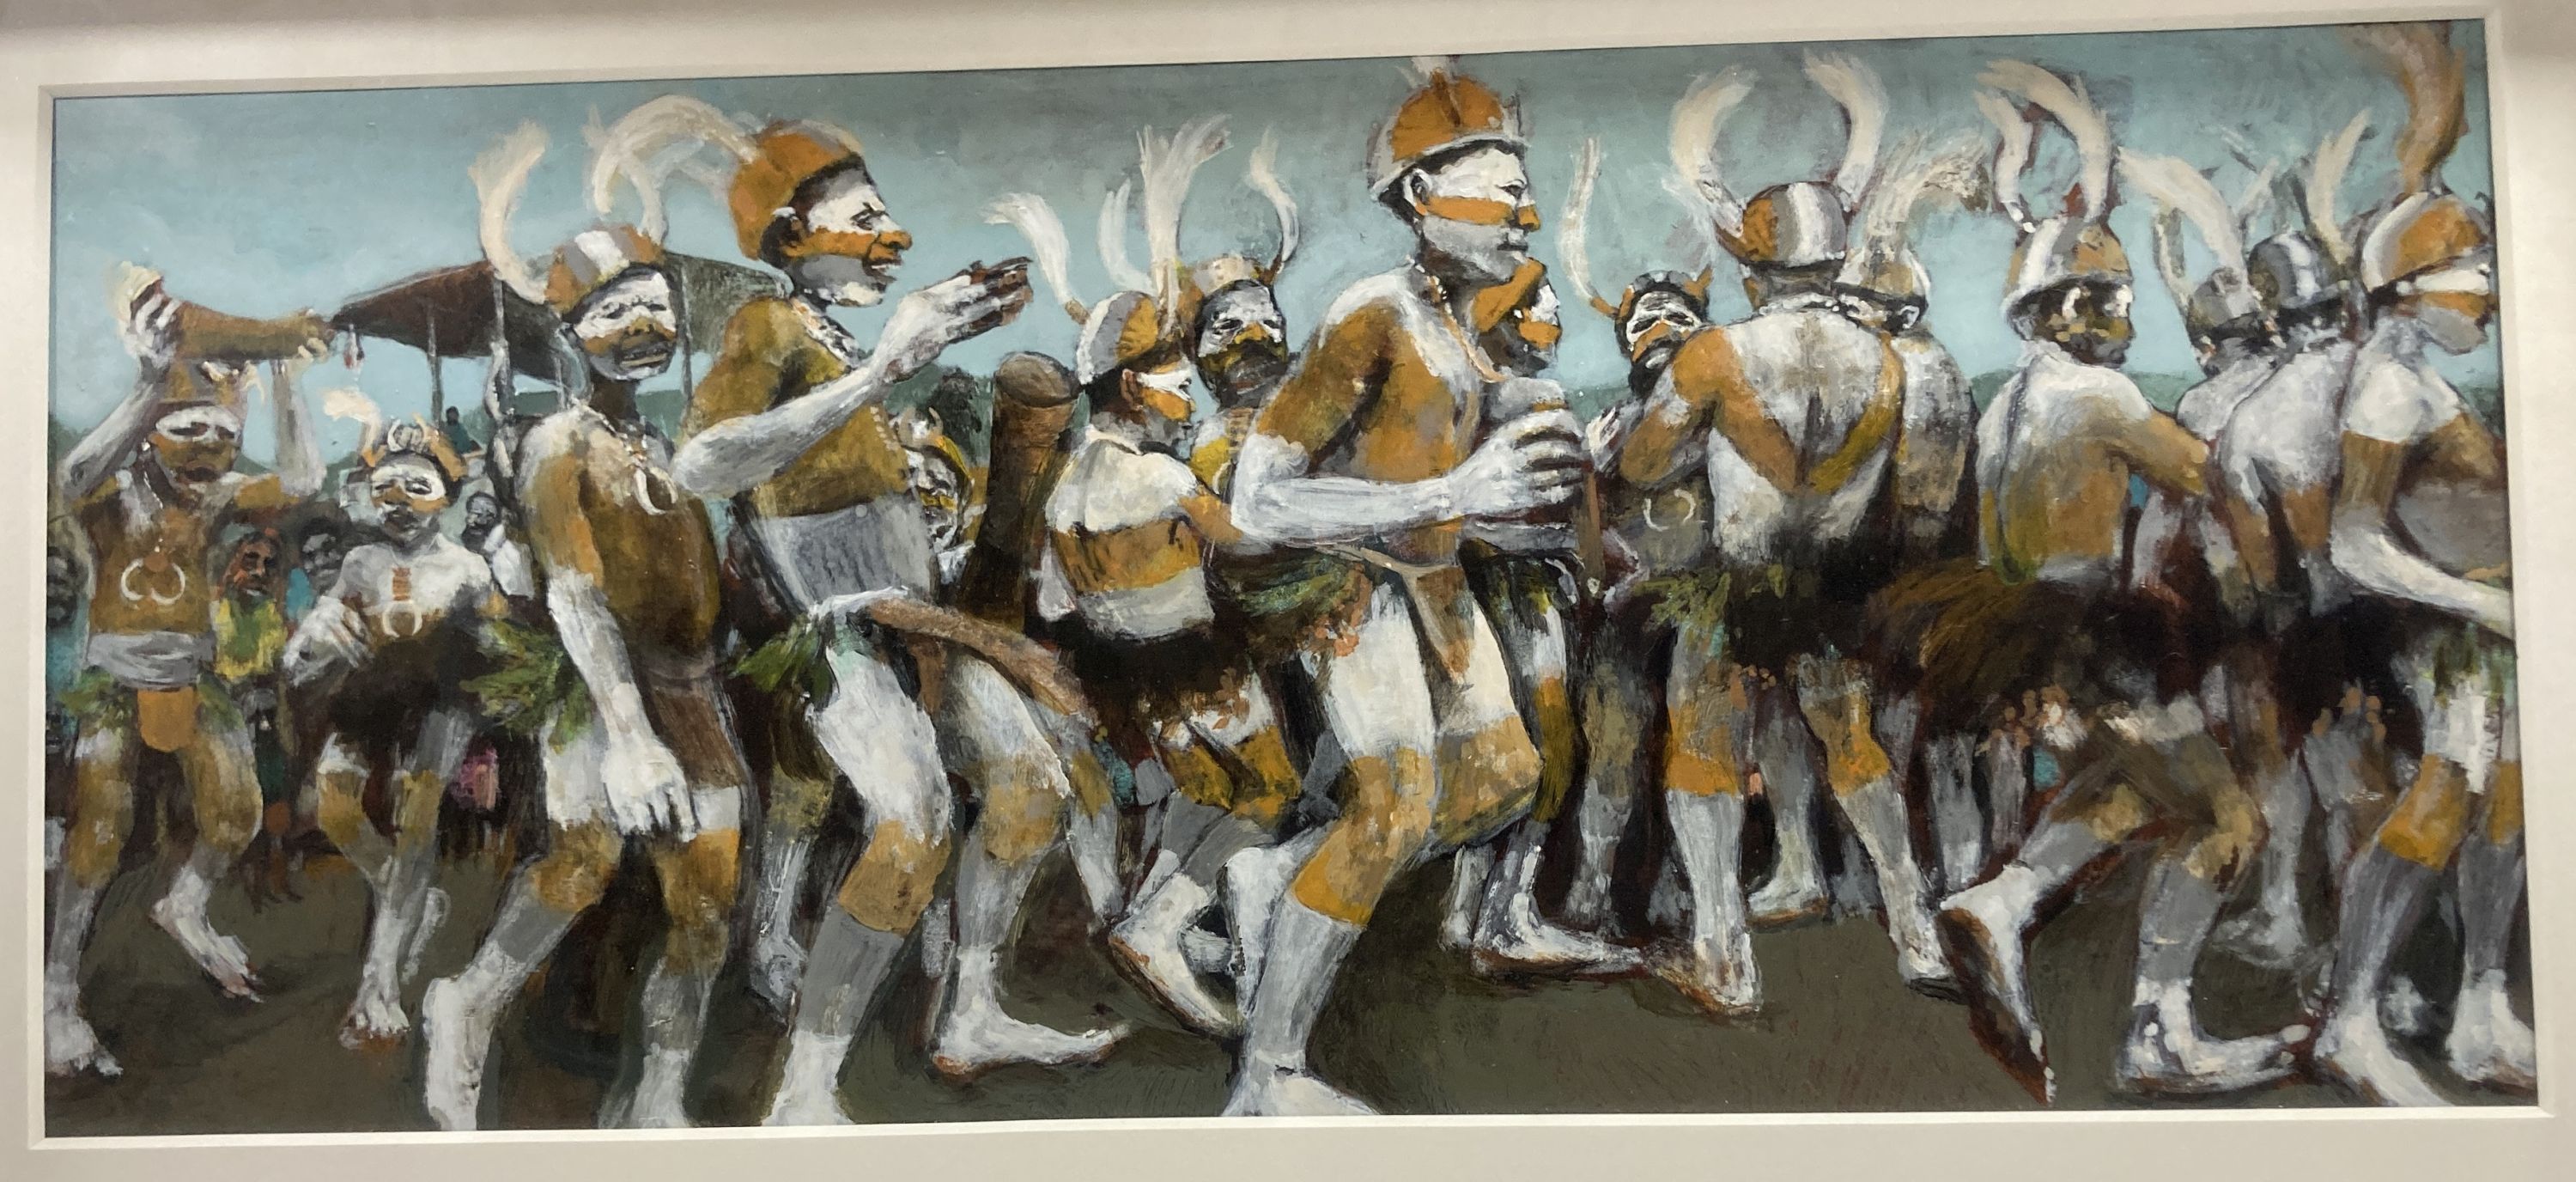 Akash Bhatt (1972-), mixed media on board, Musik Rikwest, inscribed verso and dated 2004/05, 20 x 49cm